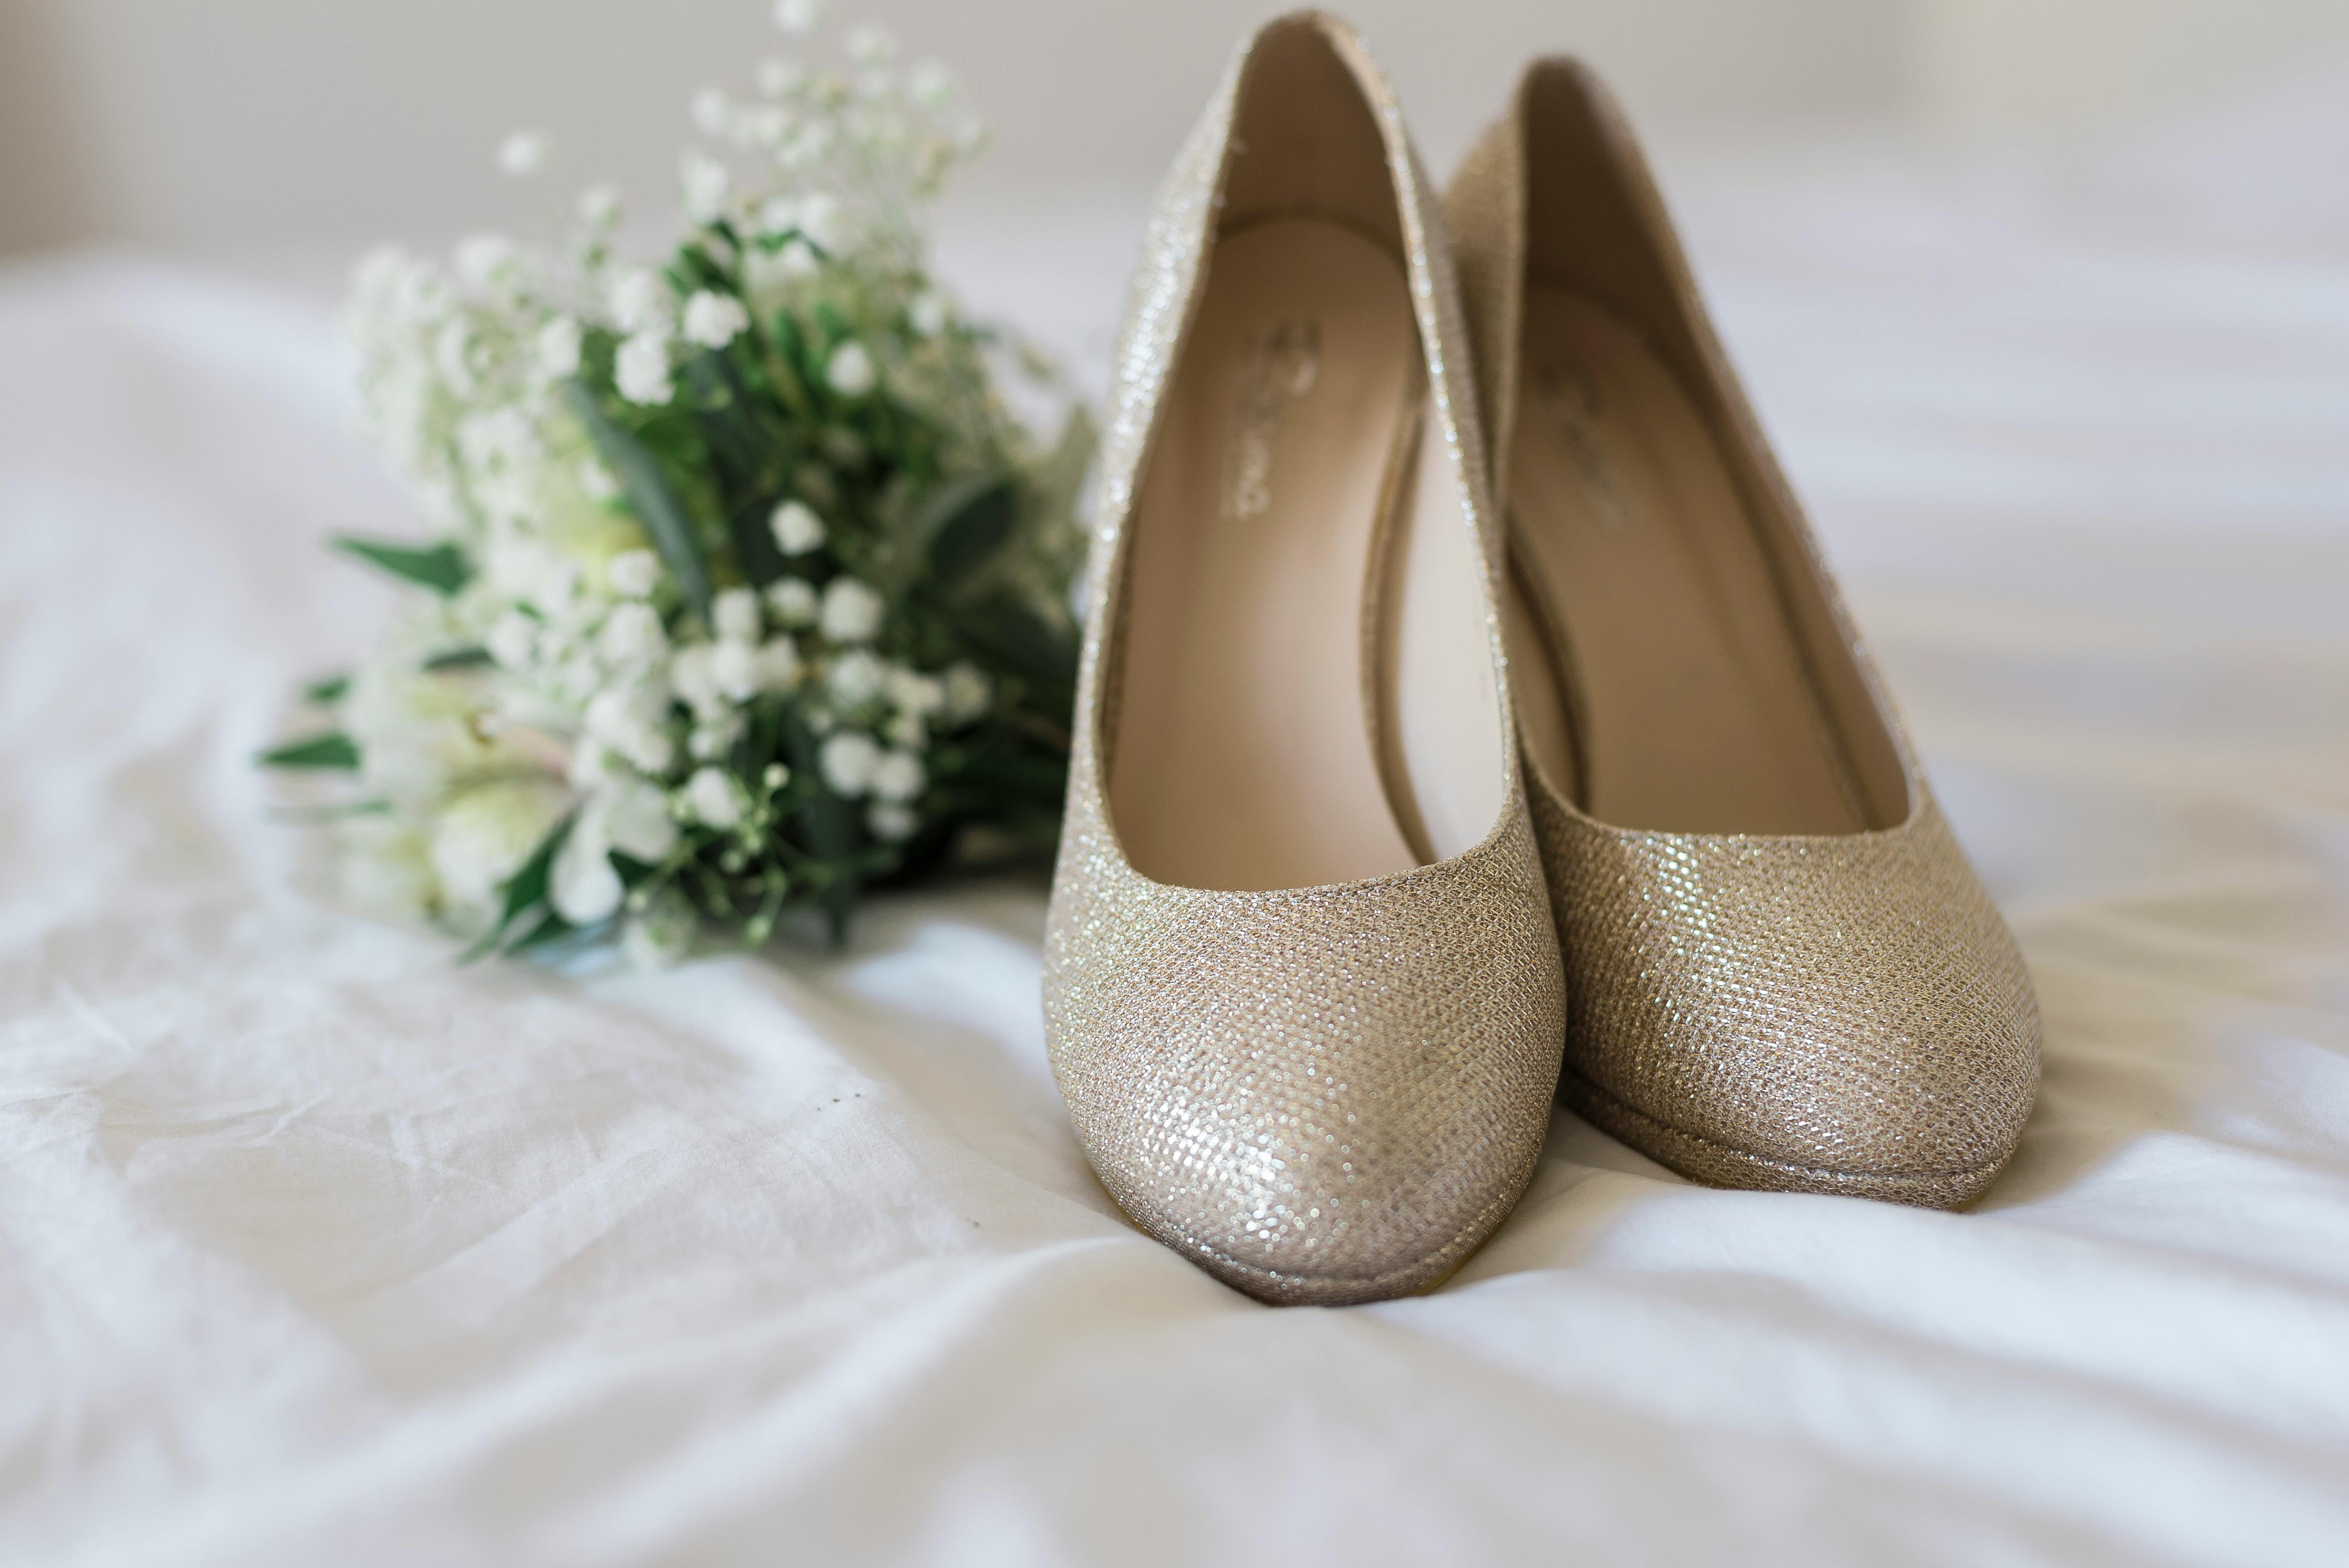 High heels covered in crystals · Free Stock Photo